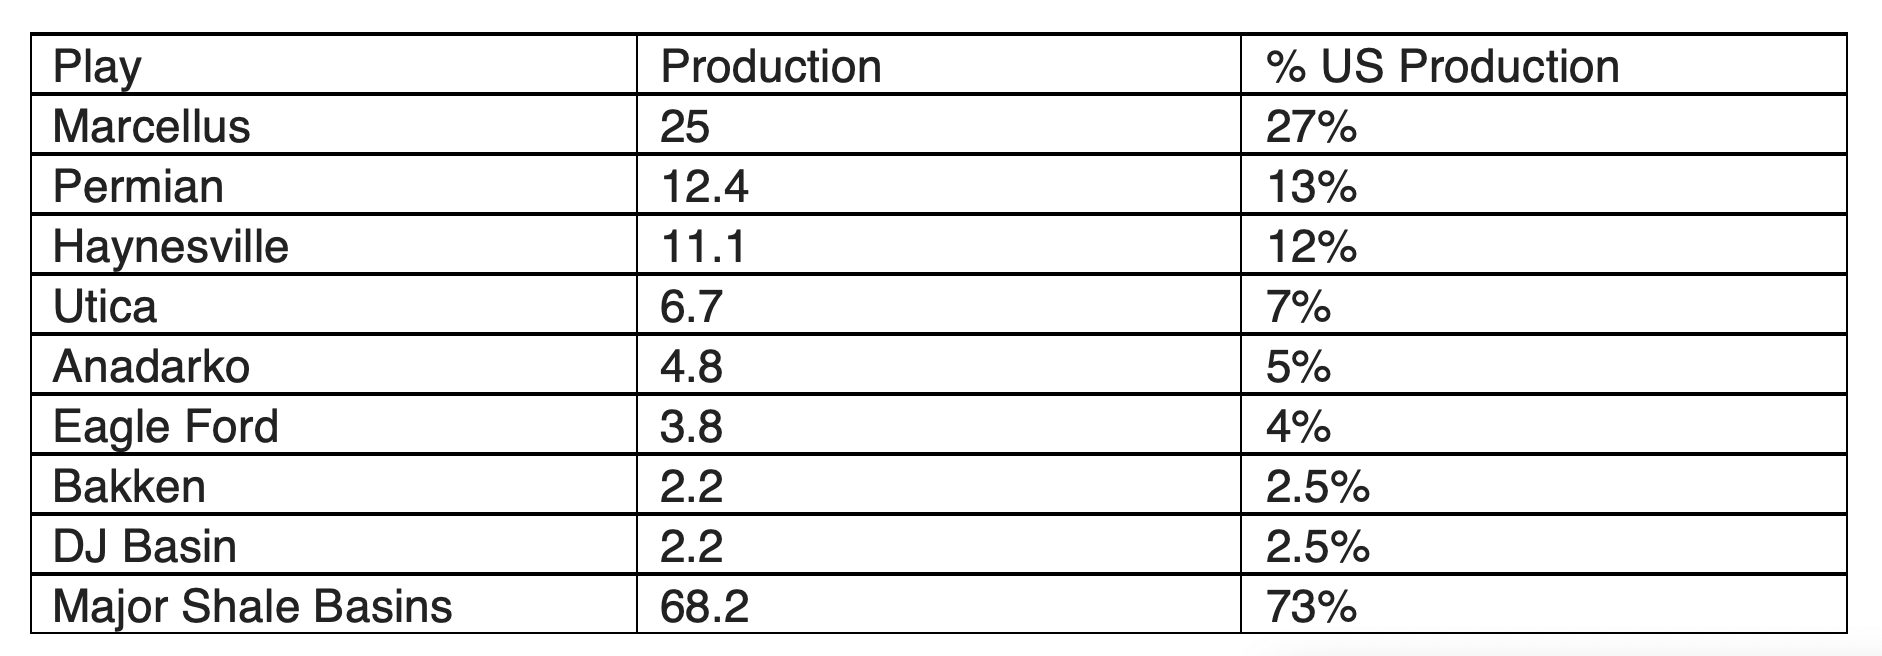 Ranking of the largest US producers of shale gas